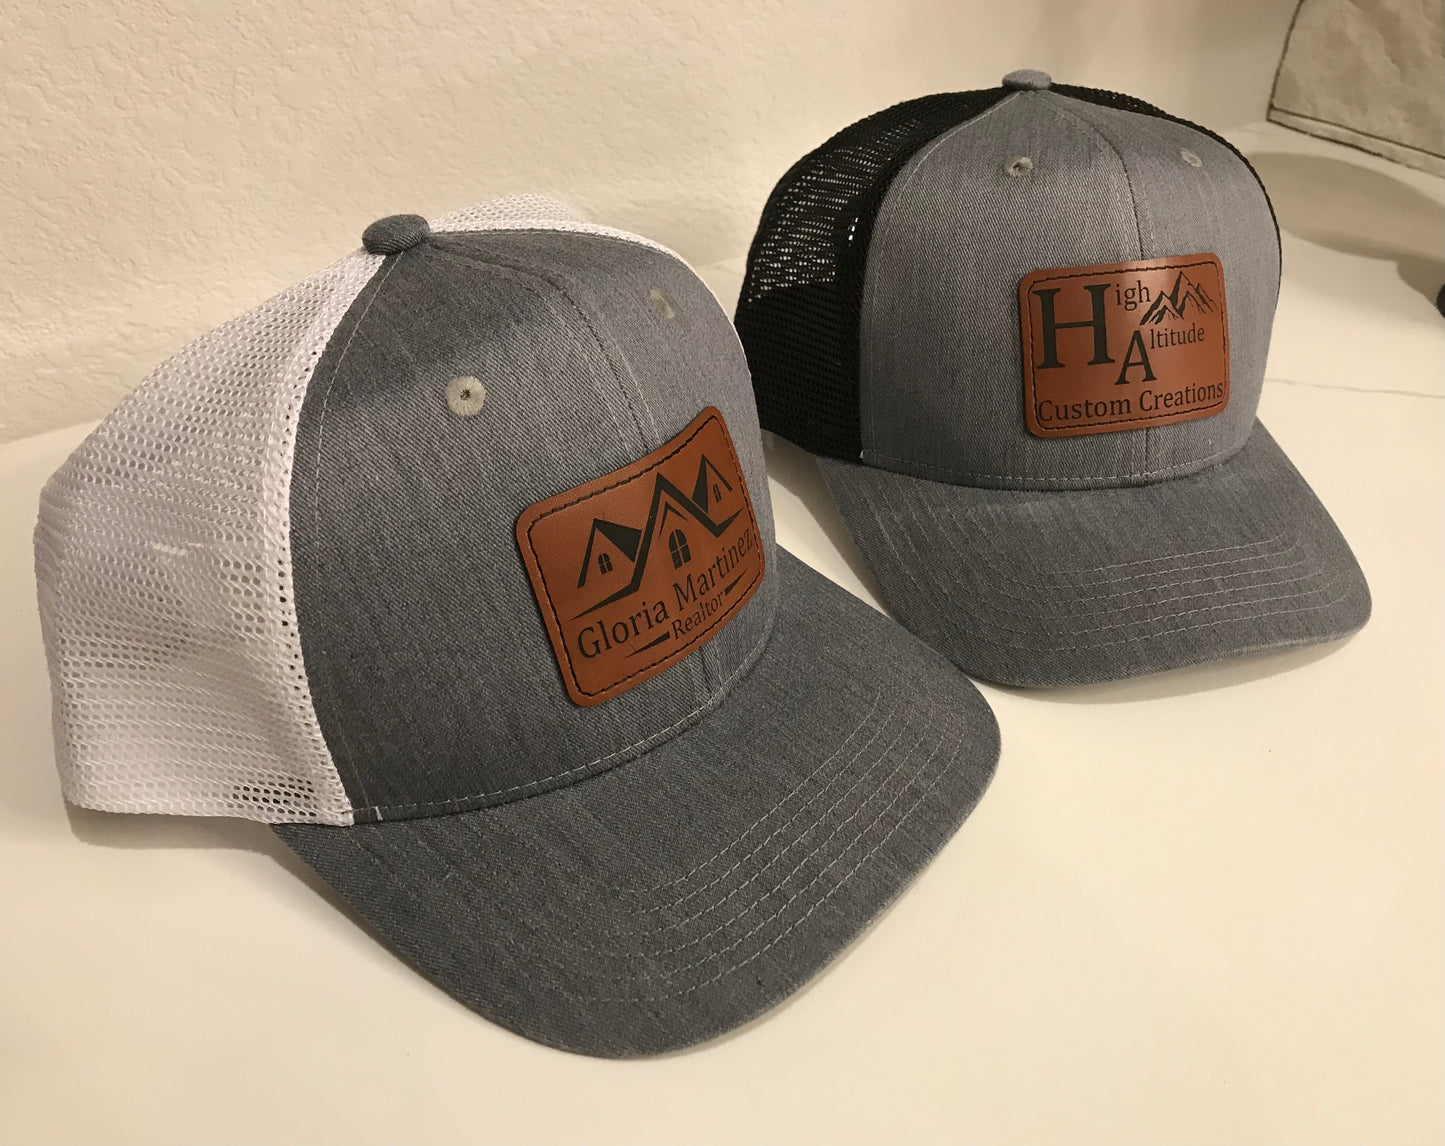 Baseball cap with customized leather patch